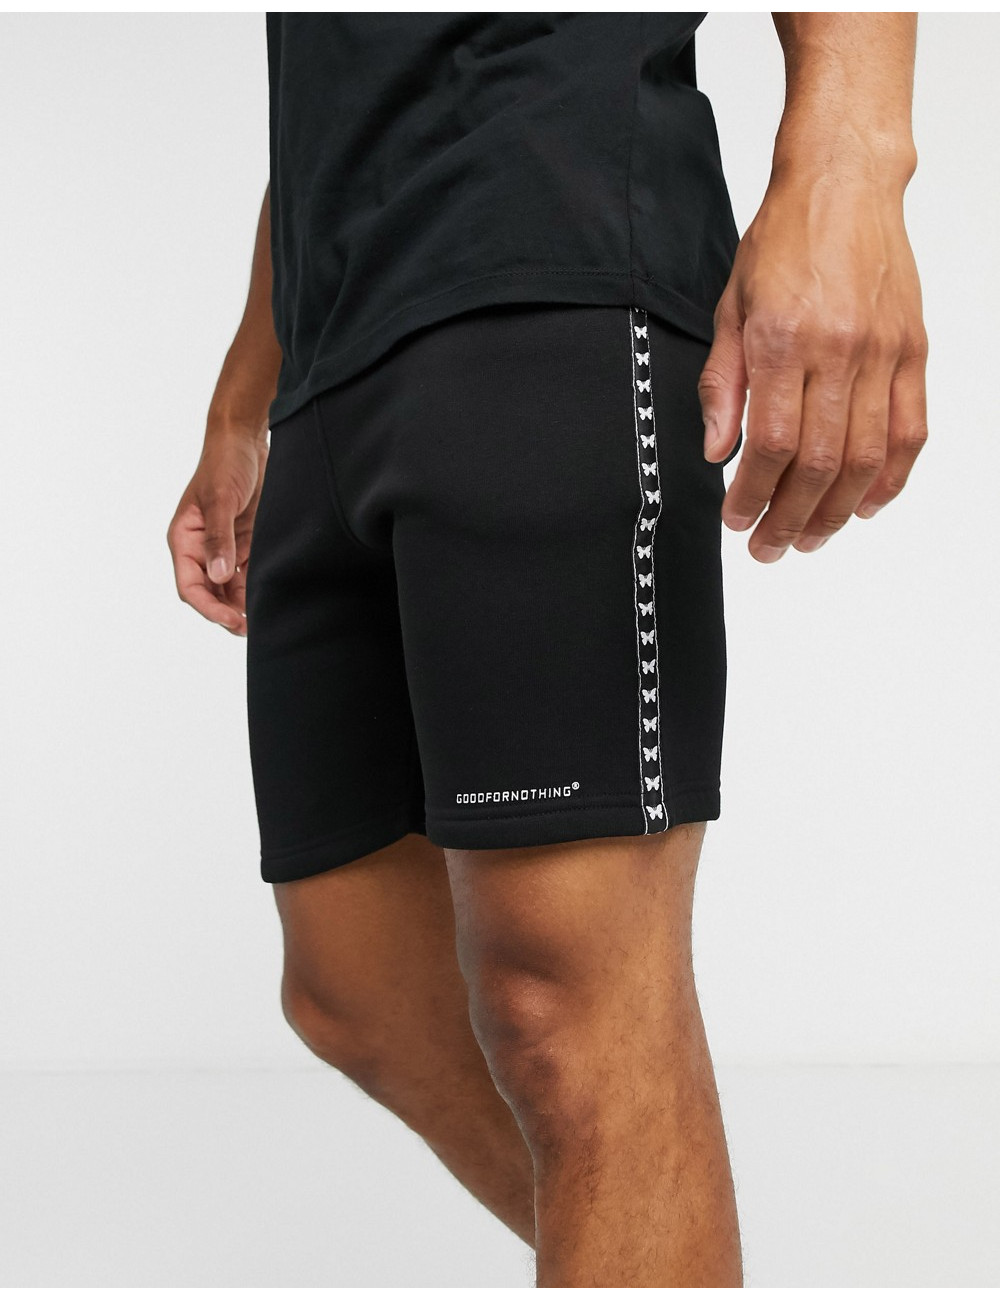 Good For Nothing shorts...